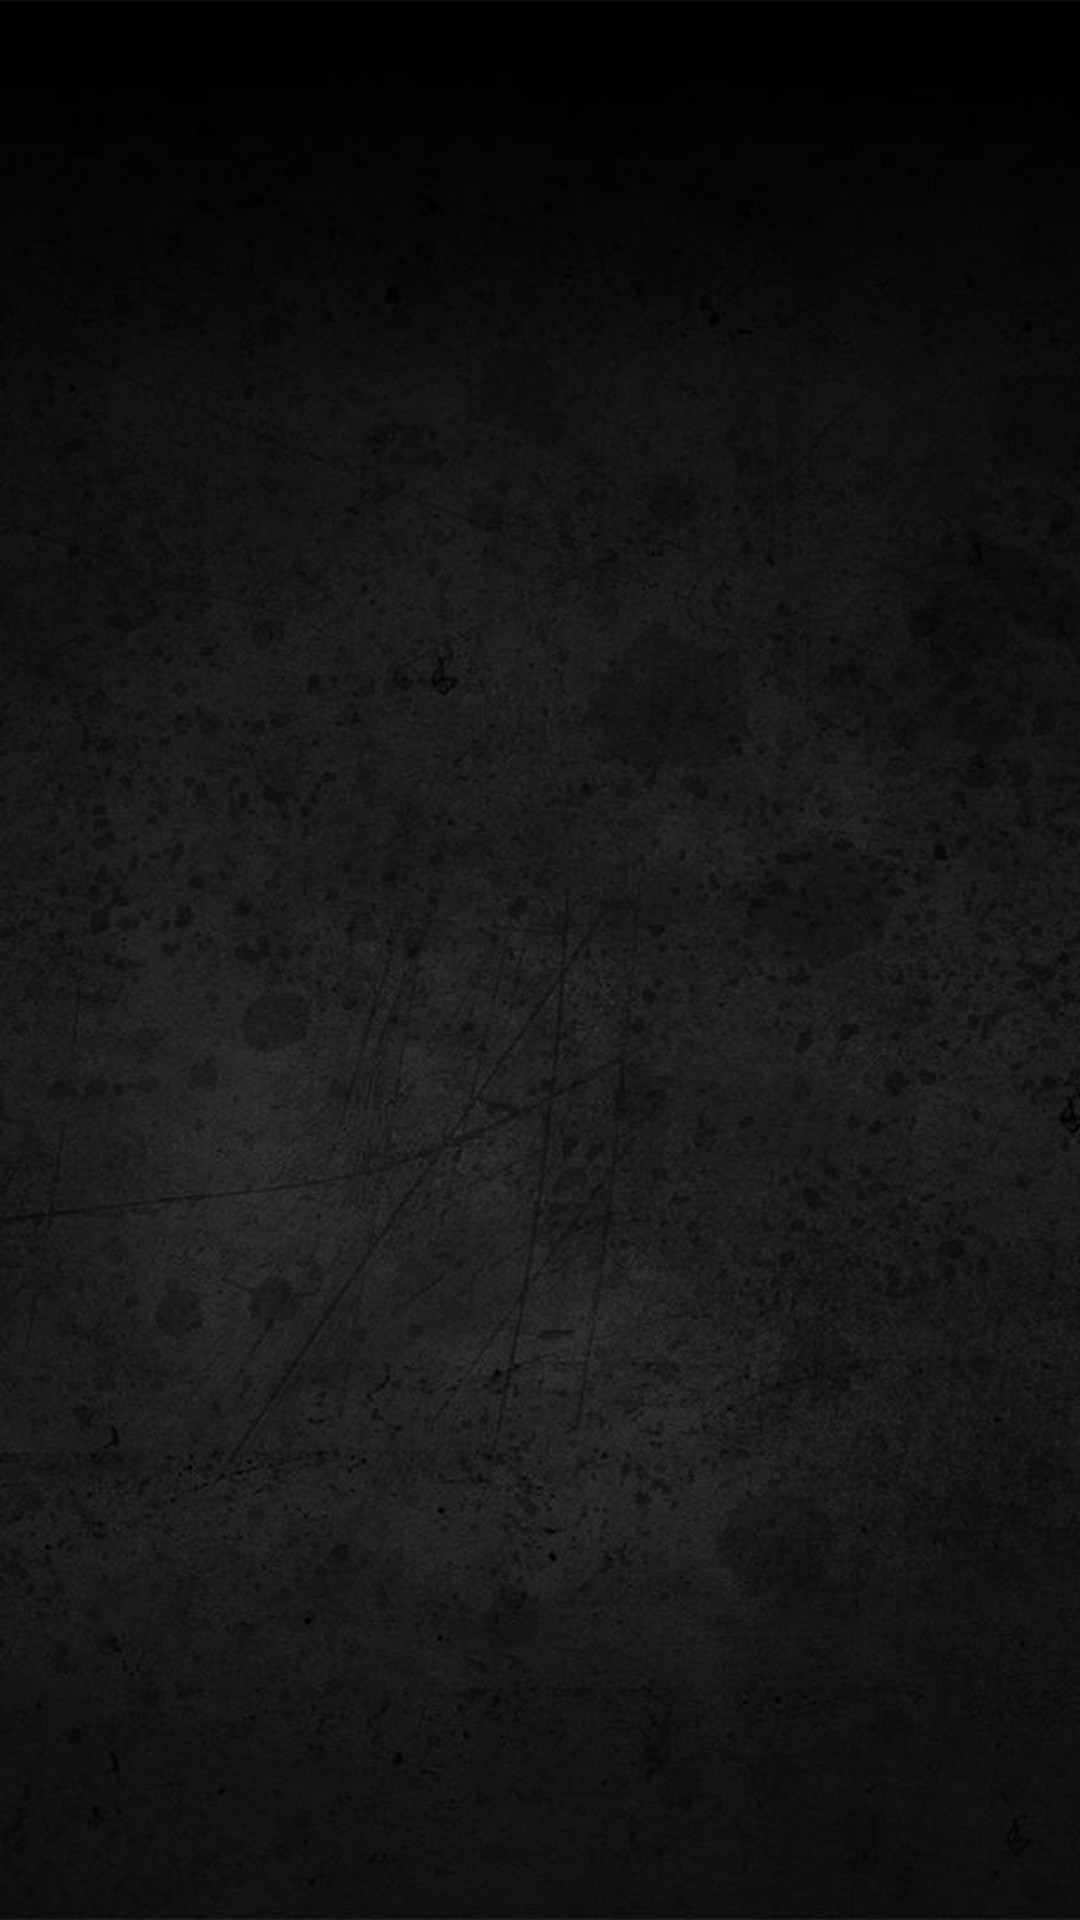 All Black Phone Wallpaper with high-resolution 1080x1920 pixel. Download all Mobile Wallpapers and Use them as wallpapers for your iPhone, Tablet, iPad, Android and other mobile devices